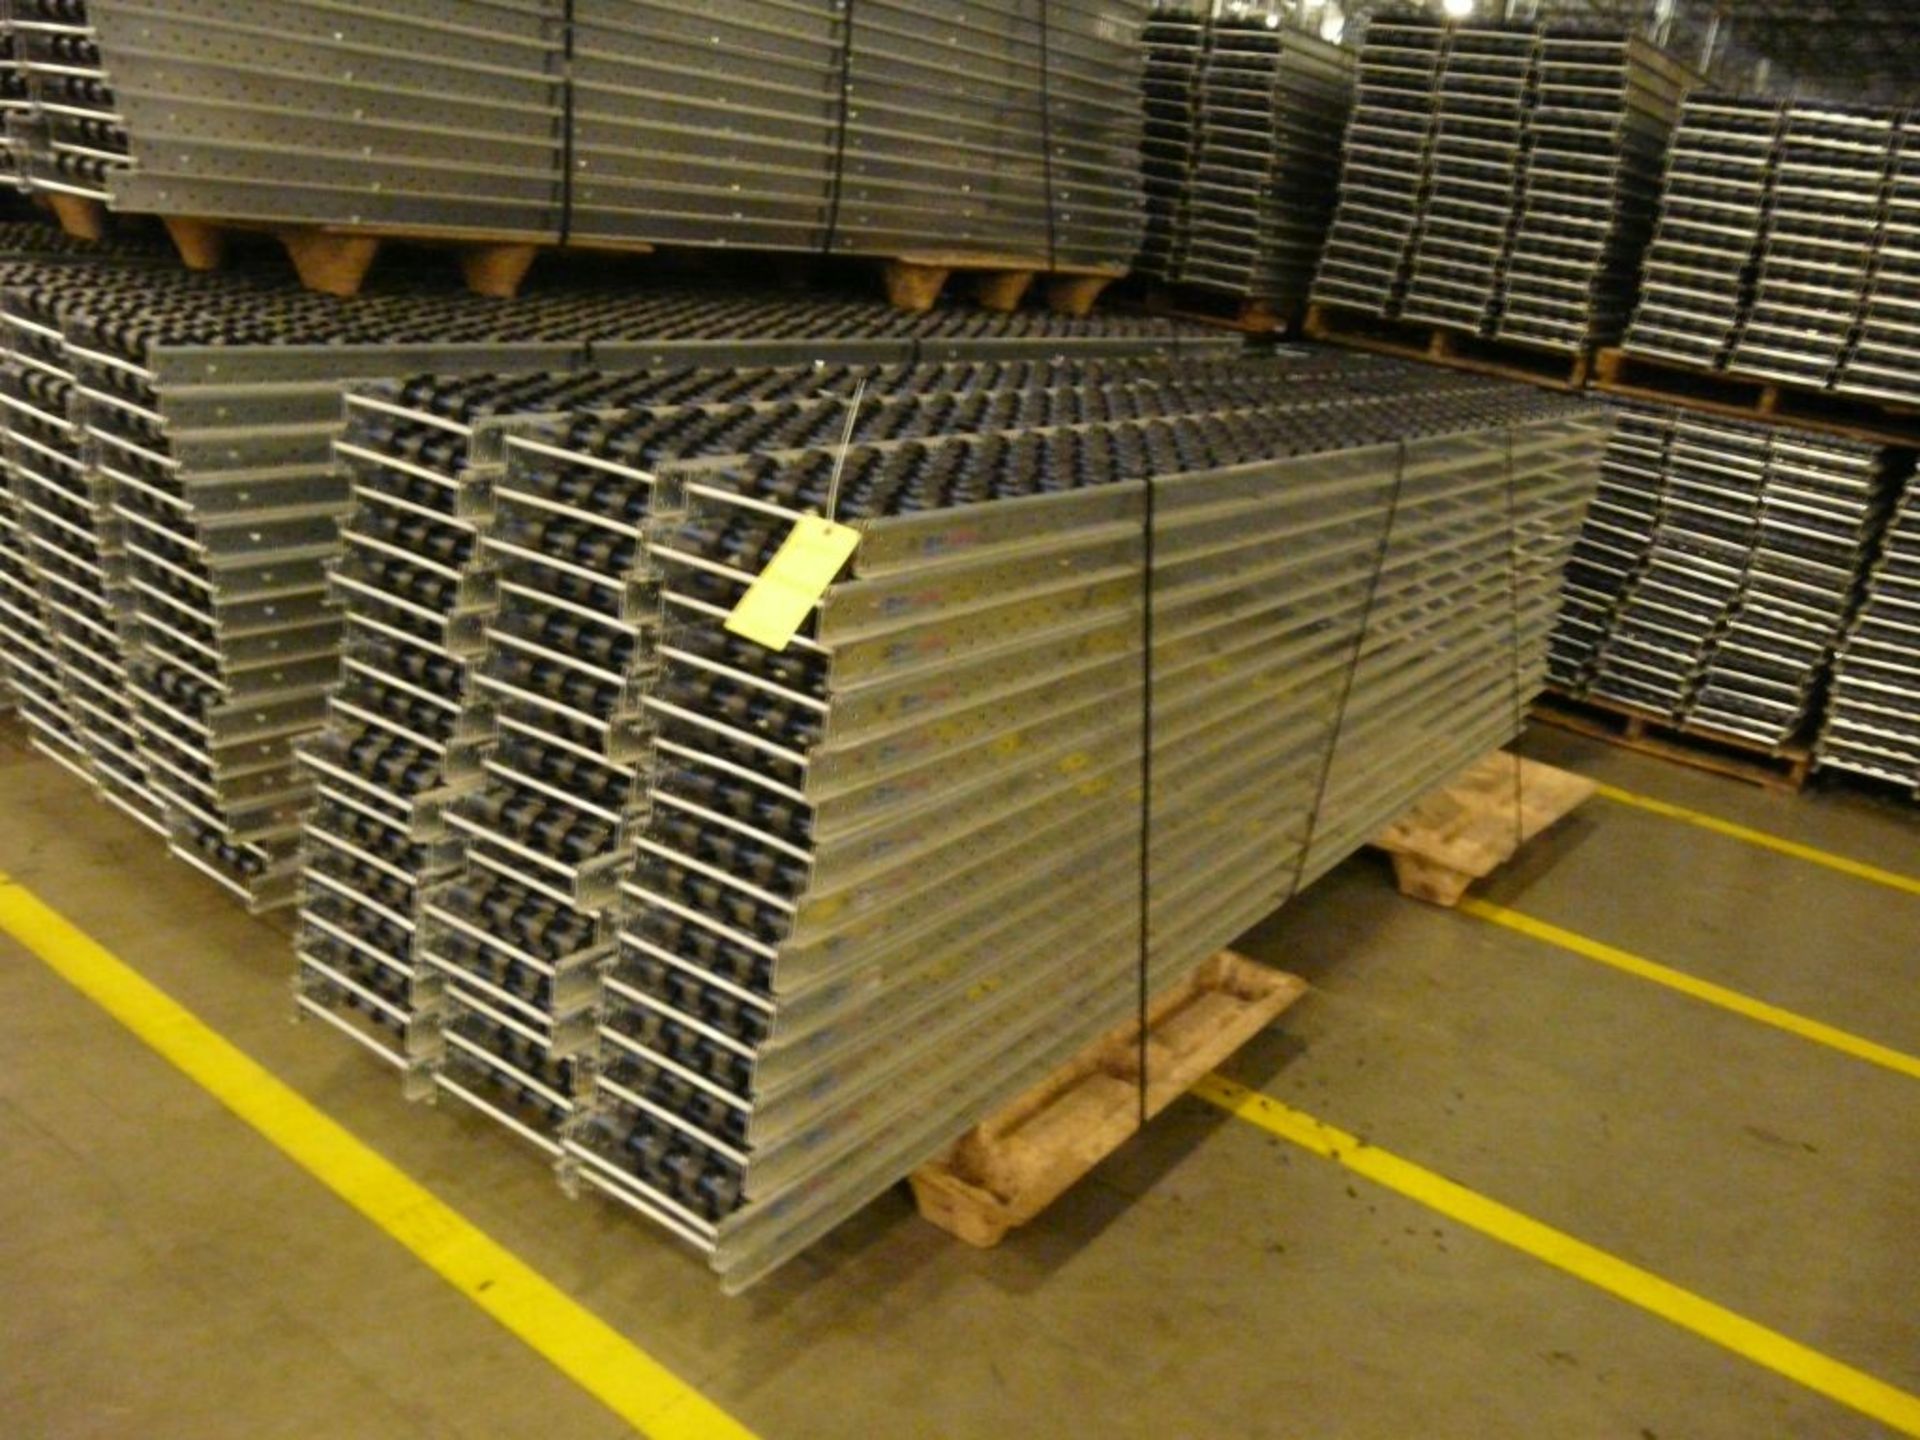 Lot of (90) SpanTrack Wheelbed Carton Flow Conveyors - 11.5'L x 11"W; Tag: 223654 - $30 Lot